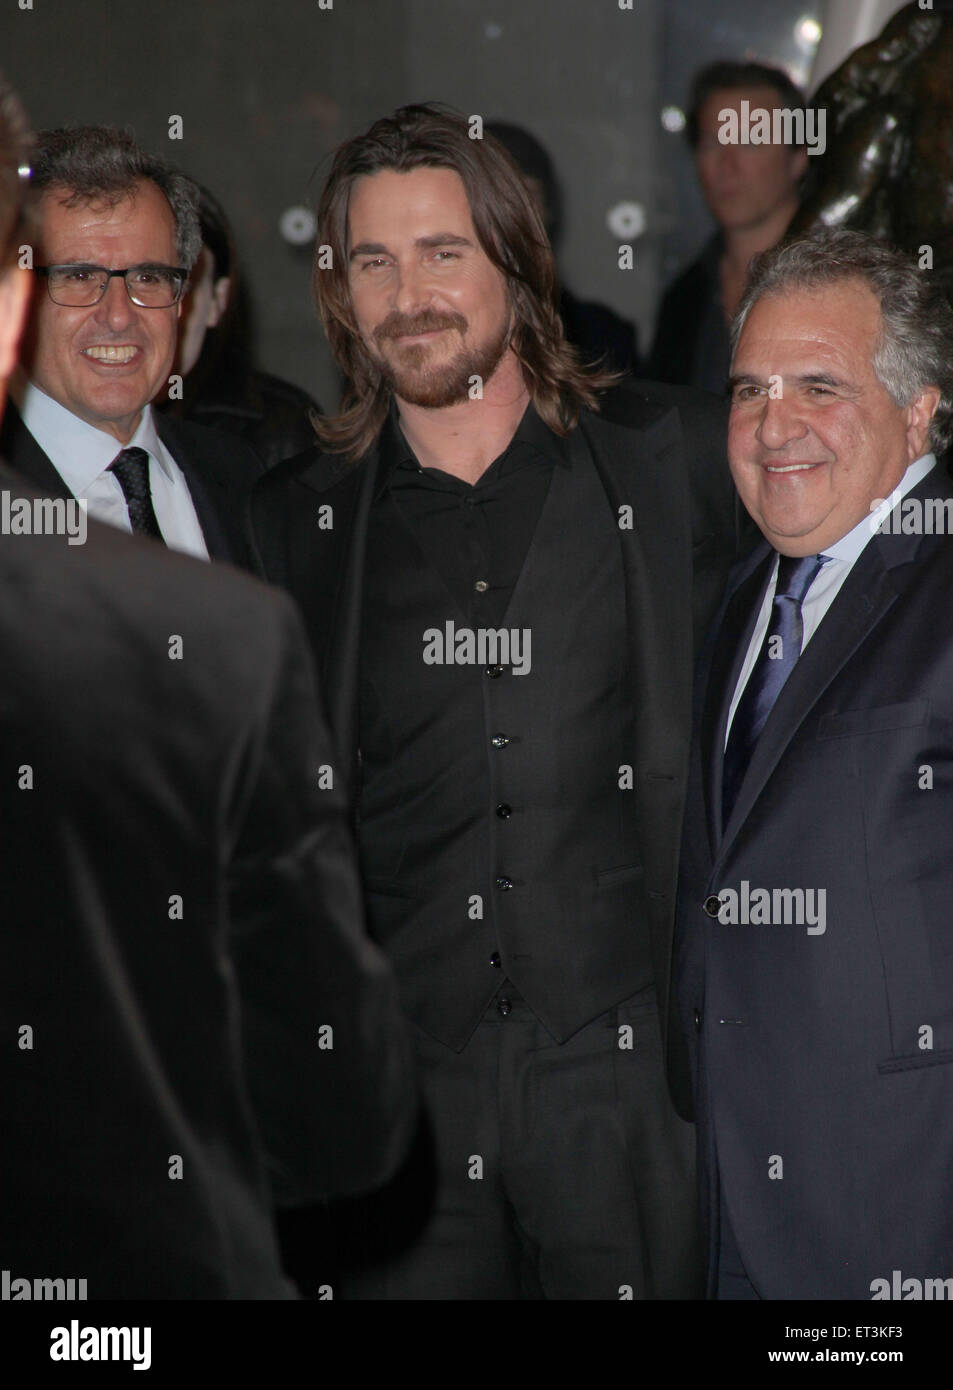 New York Premiere of 'Exodus: Gods And Kings' at the Brooklyn Museum - Arrivals  Featuring: Peter Chernin,Christian Bale,Jim Gianopulos Where: New York City, New York, United States When: 07 Dec 2014 Credit: PNP/WENN.com Stock Photo